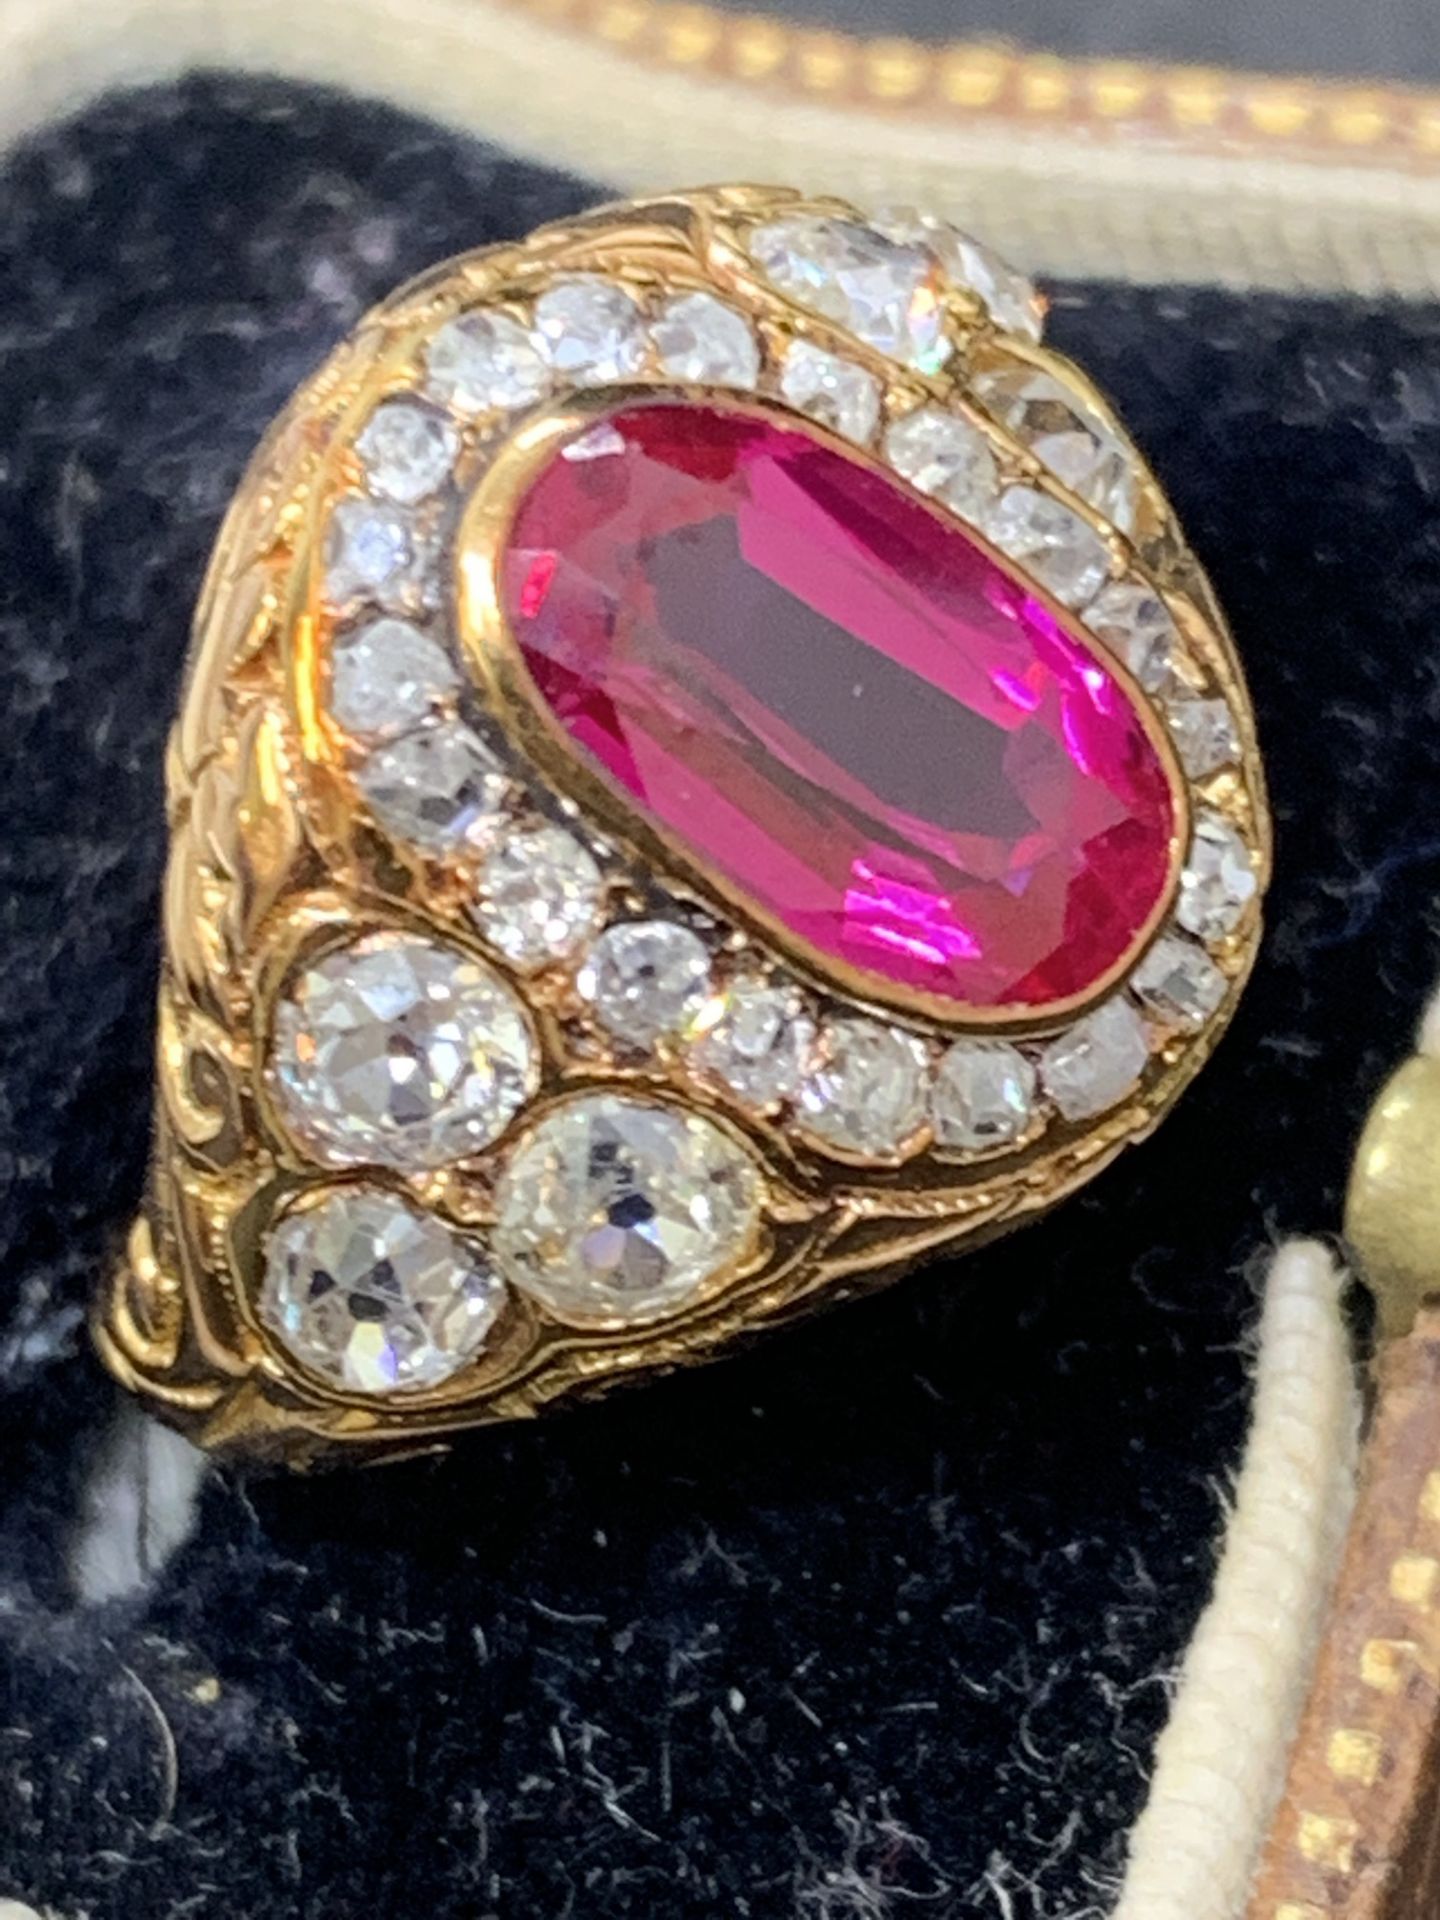 Vintage 18 carat gold ring set with ruby type stone & 1.3 carats of old mine cut diamonds